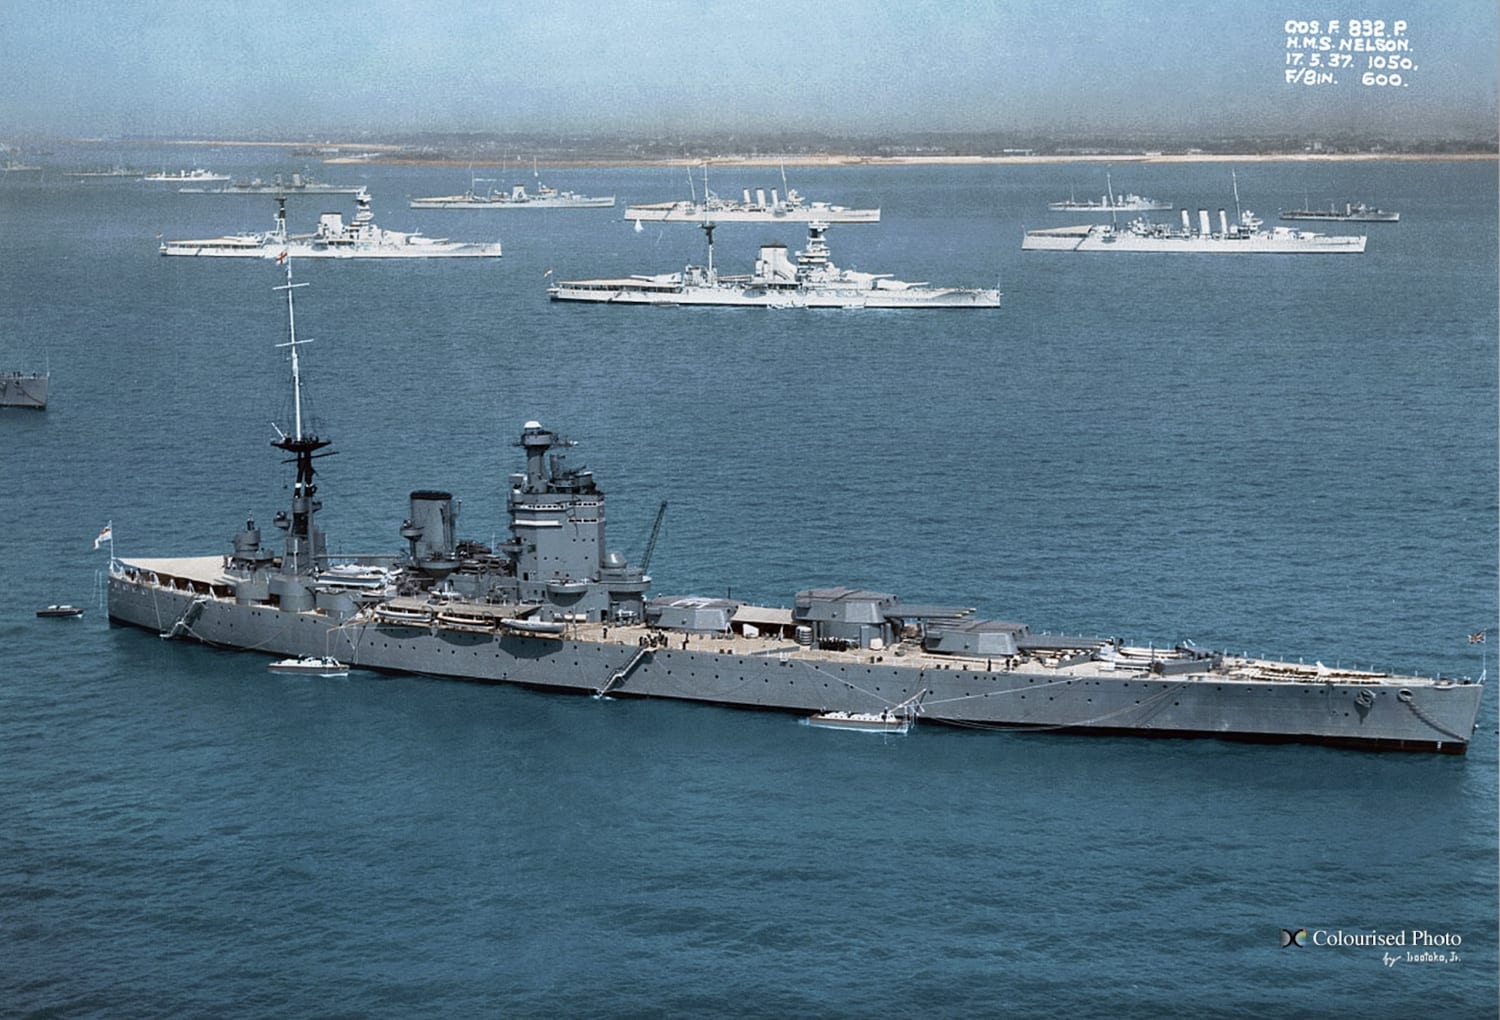 HMS Nelson off of Spithead for the Fleet Review in 1937 - anchored in the background are two Queen Elizabeth class battleships and two London Class Cruisers - colorized by Irootoko Jr.